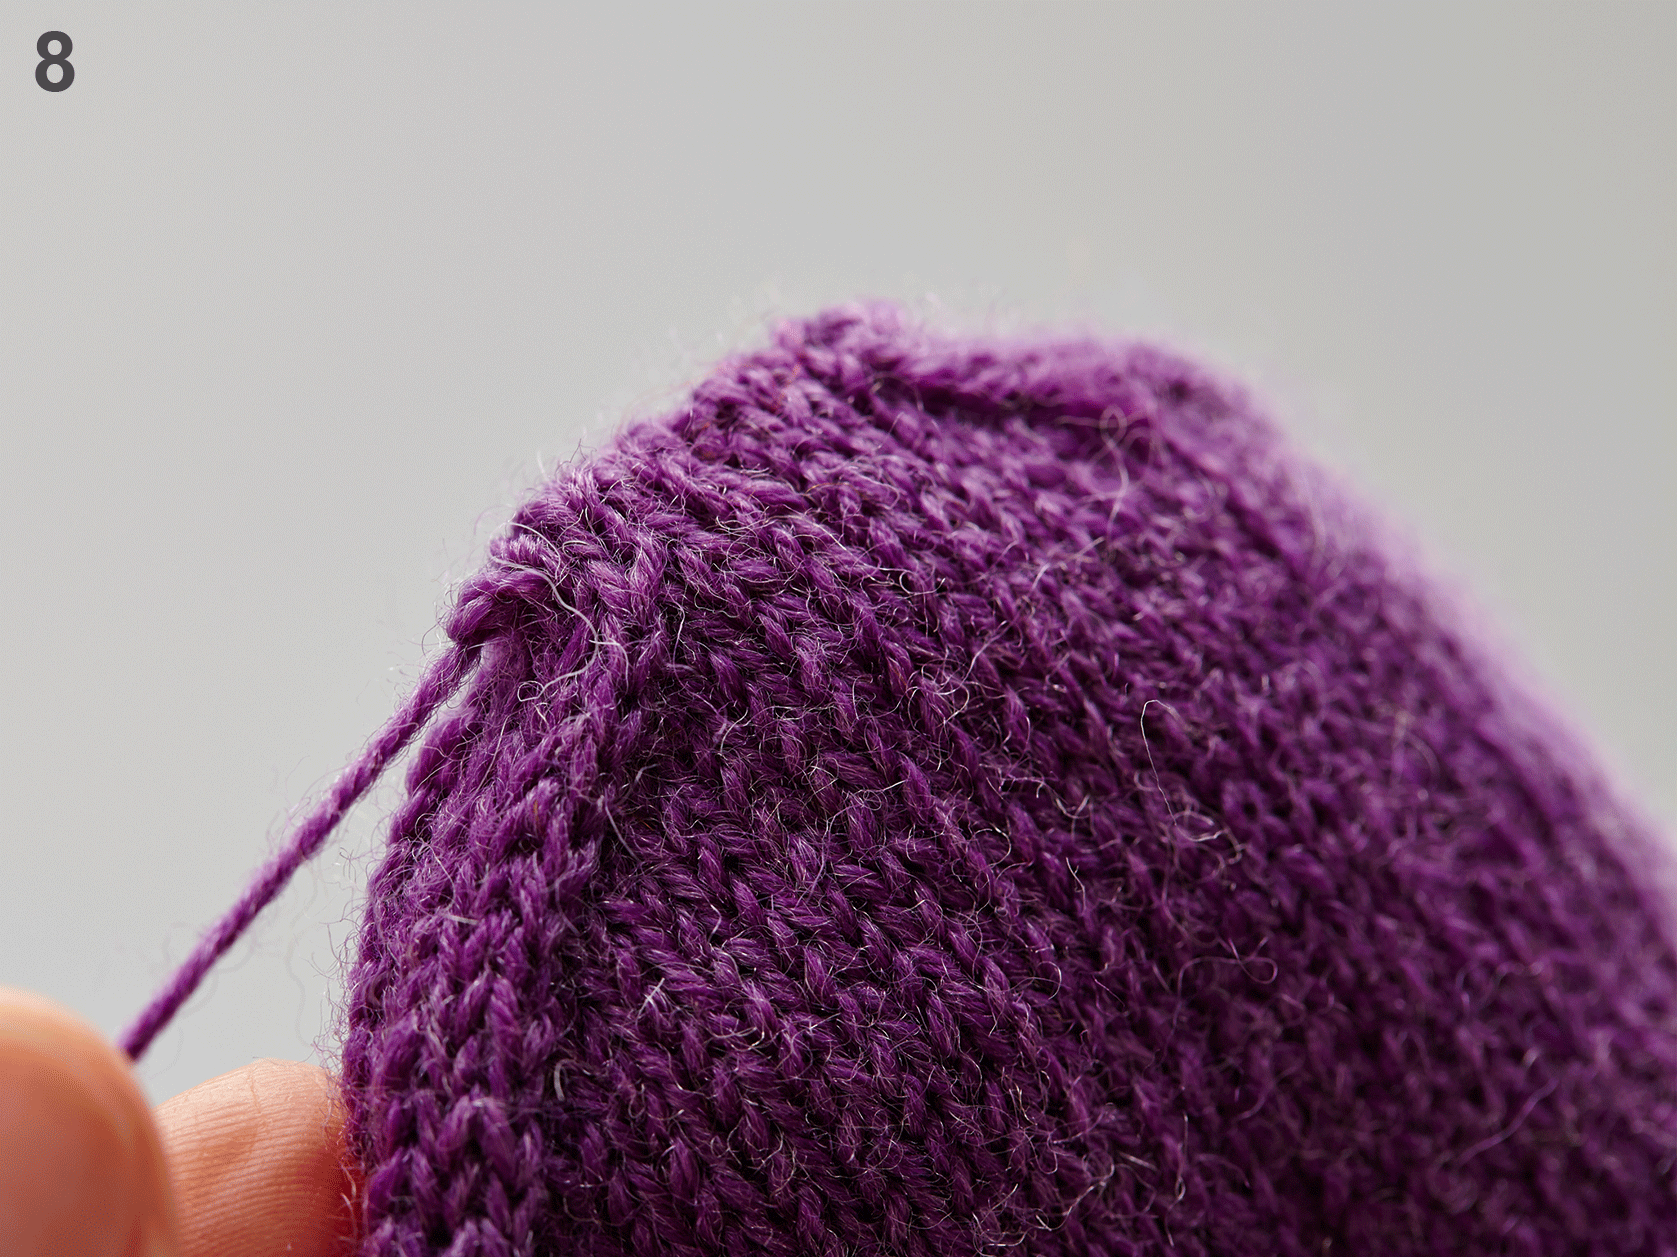 How to graft knitting with Kitchener Stitch tutorial step 8